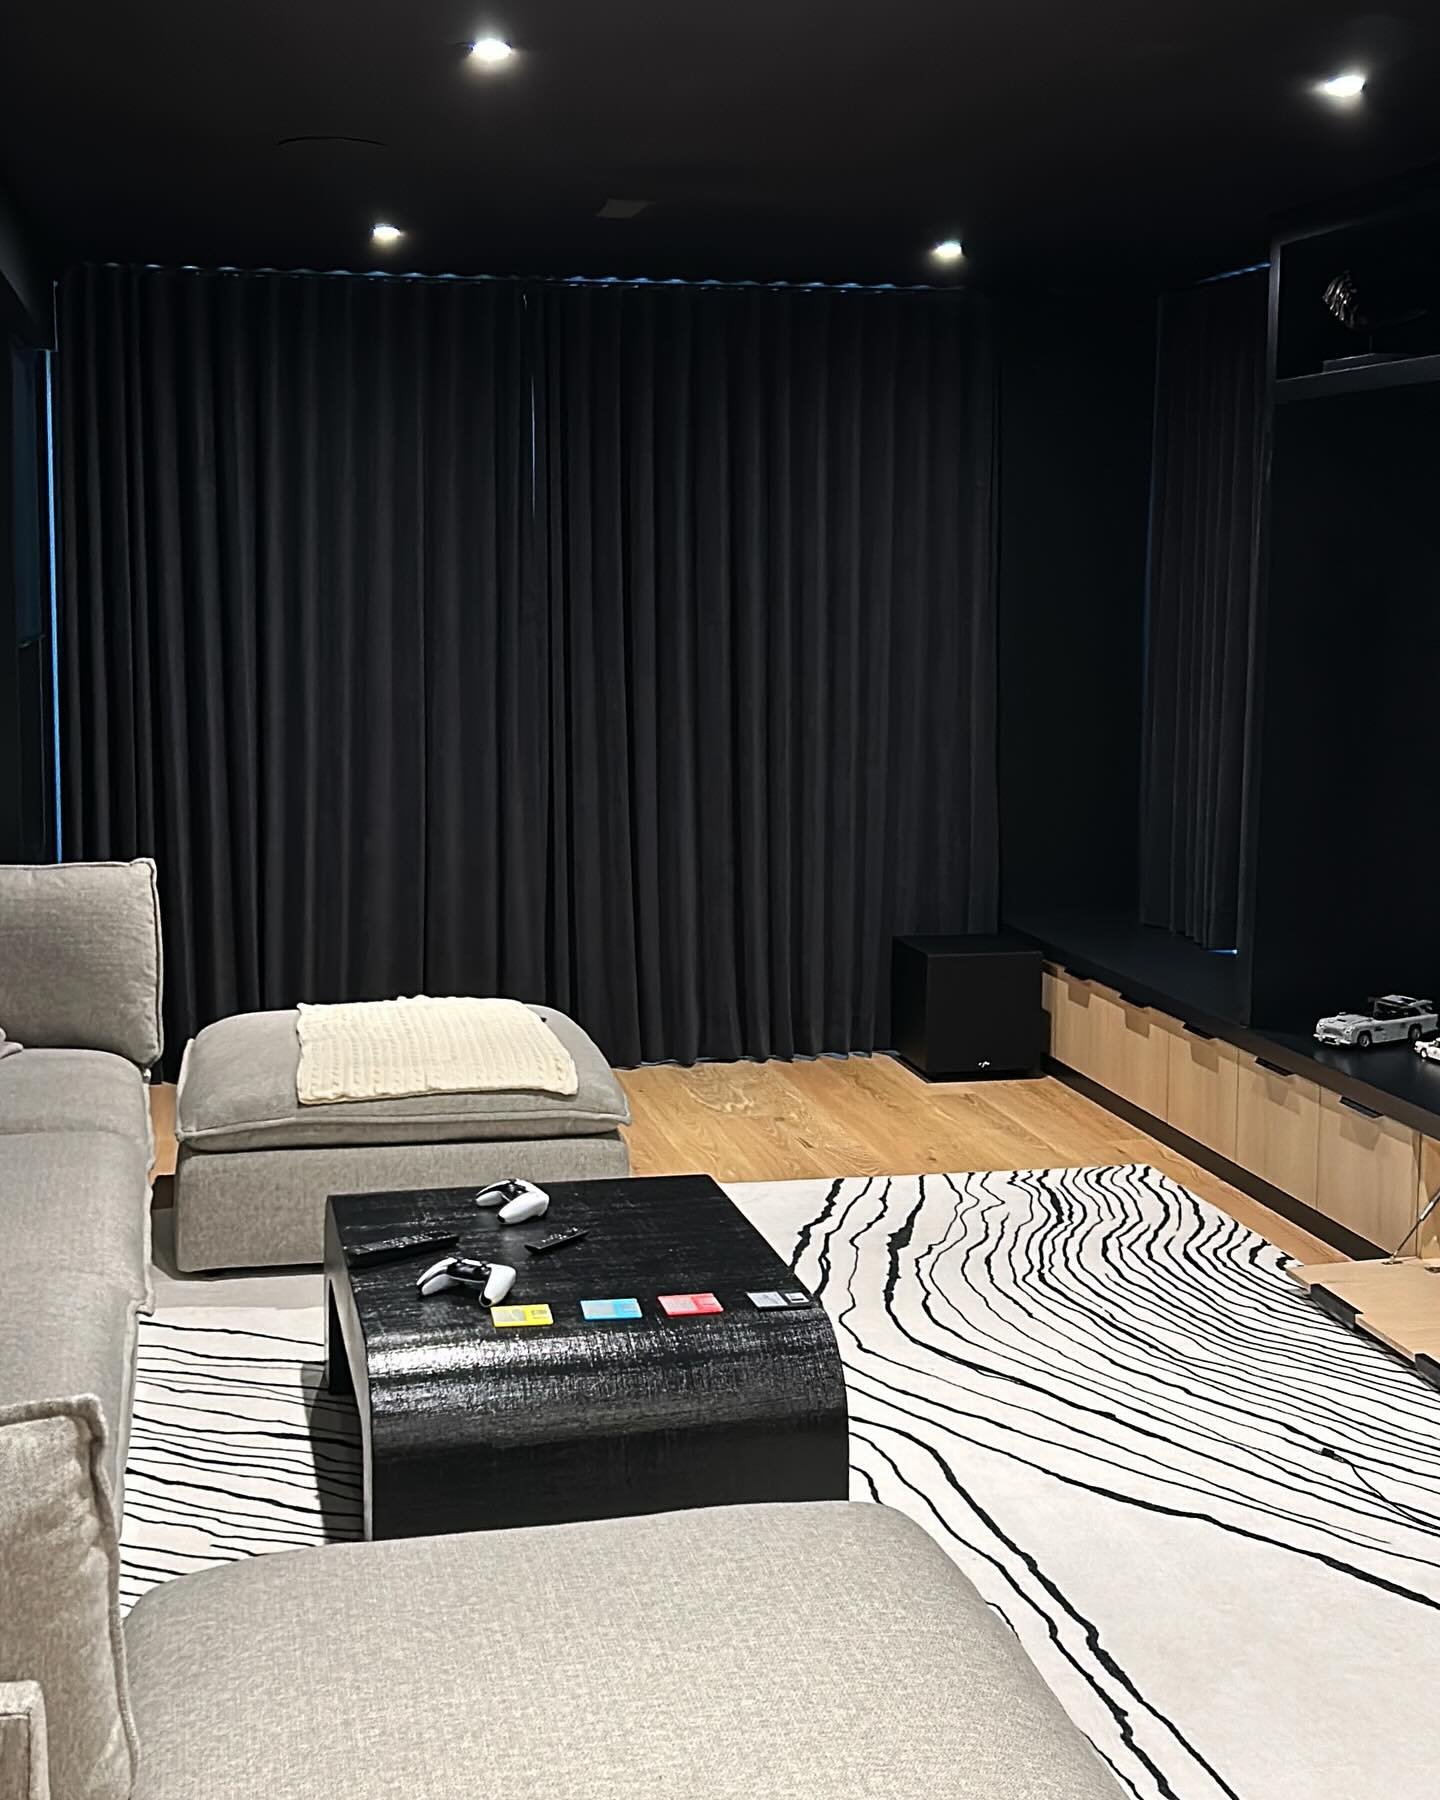 Lights, camera, transformation! 🎥 Dive into the cozy vibes of this new movie room ✨ Share your must-watch movies in the comments! 🍿
.
.
Designed By: @sodapopdesigninc 
.
.
#interiordesign #interiordesignersofinsta #ontariodesigner #kingcityontario 